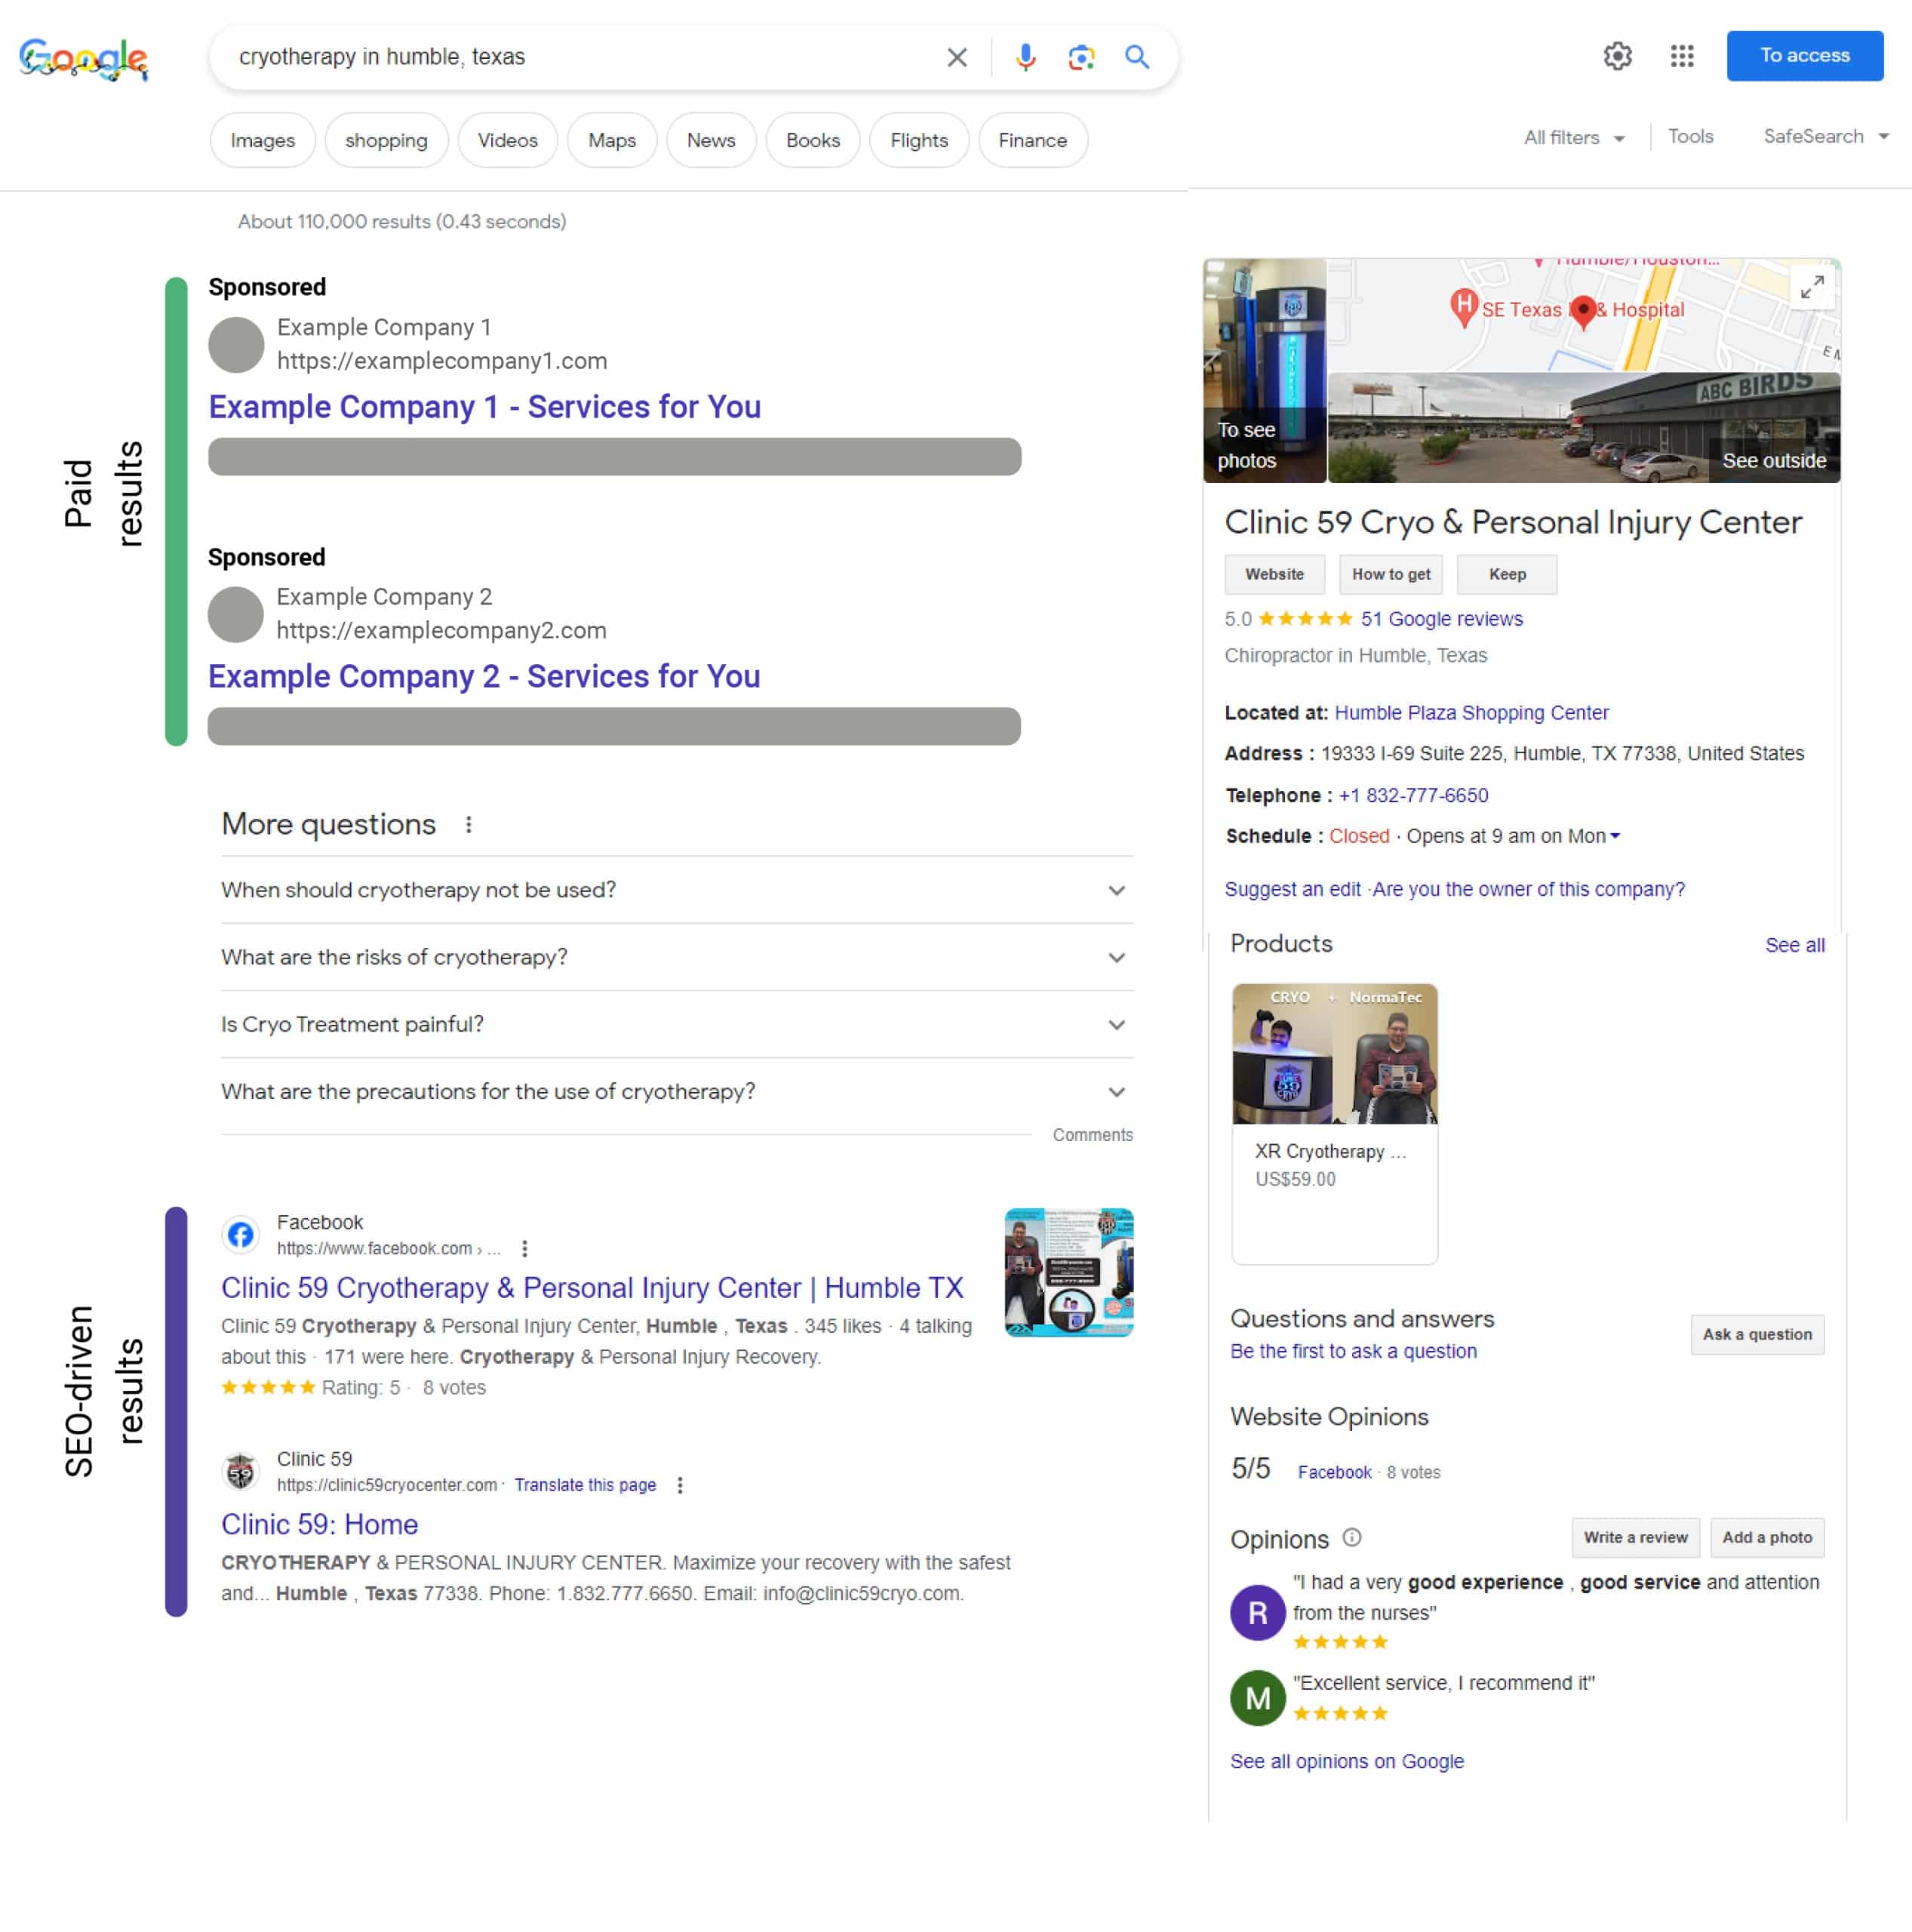 Google Ads results for Cryoteraphy in Humble Texas: A screenshot of a computer